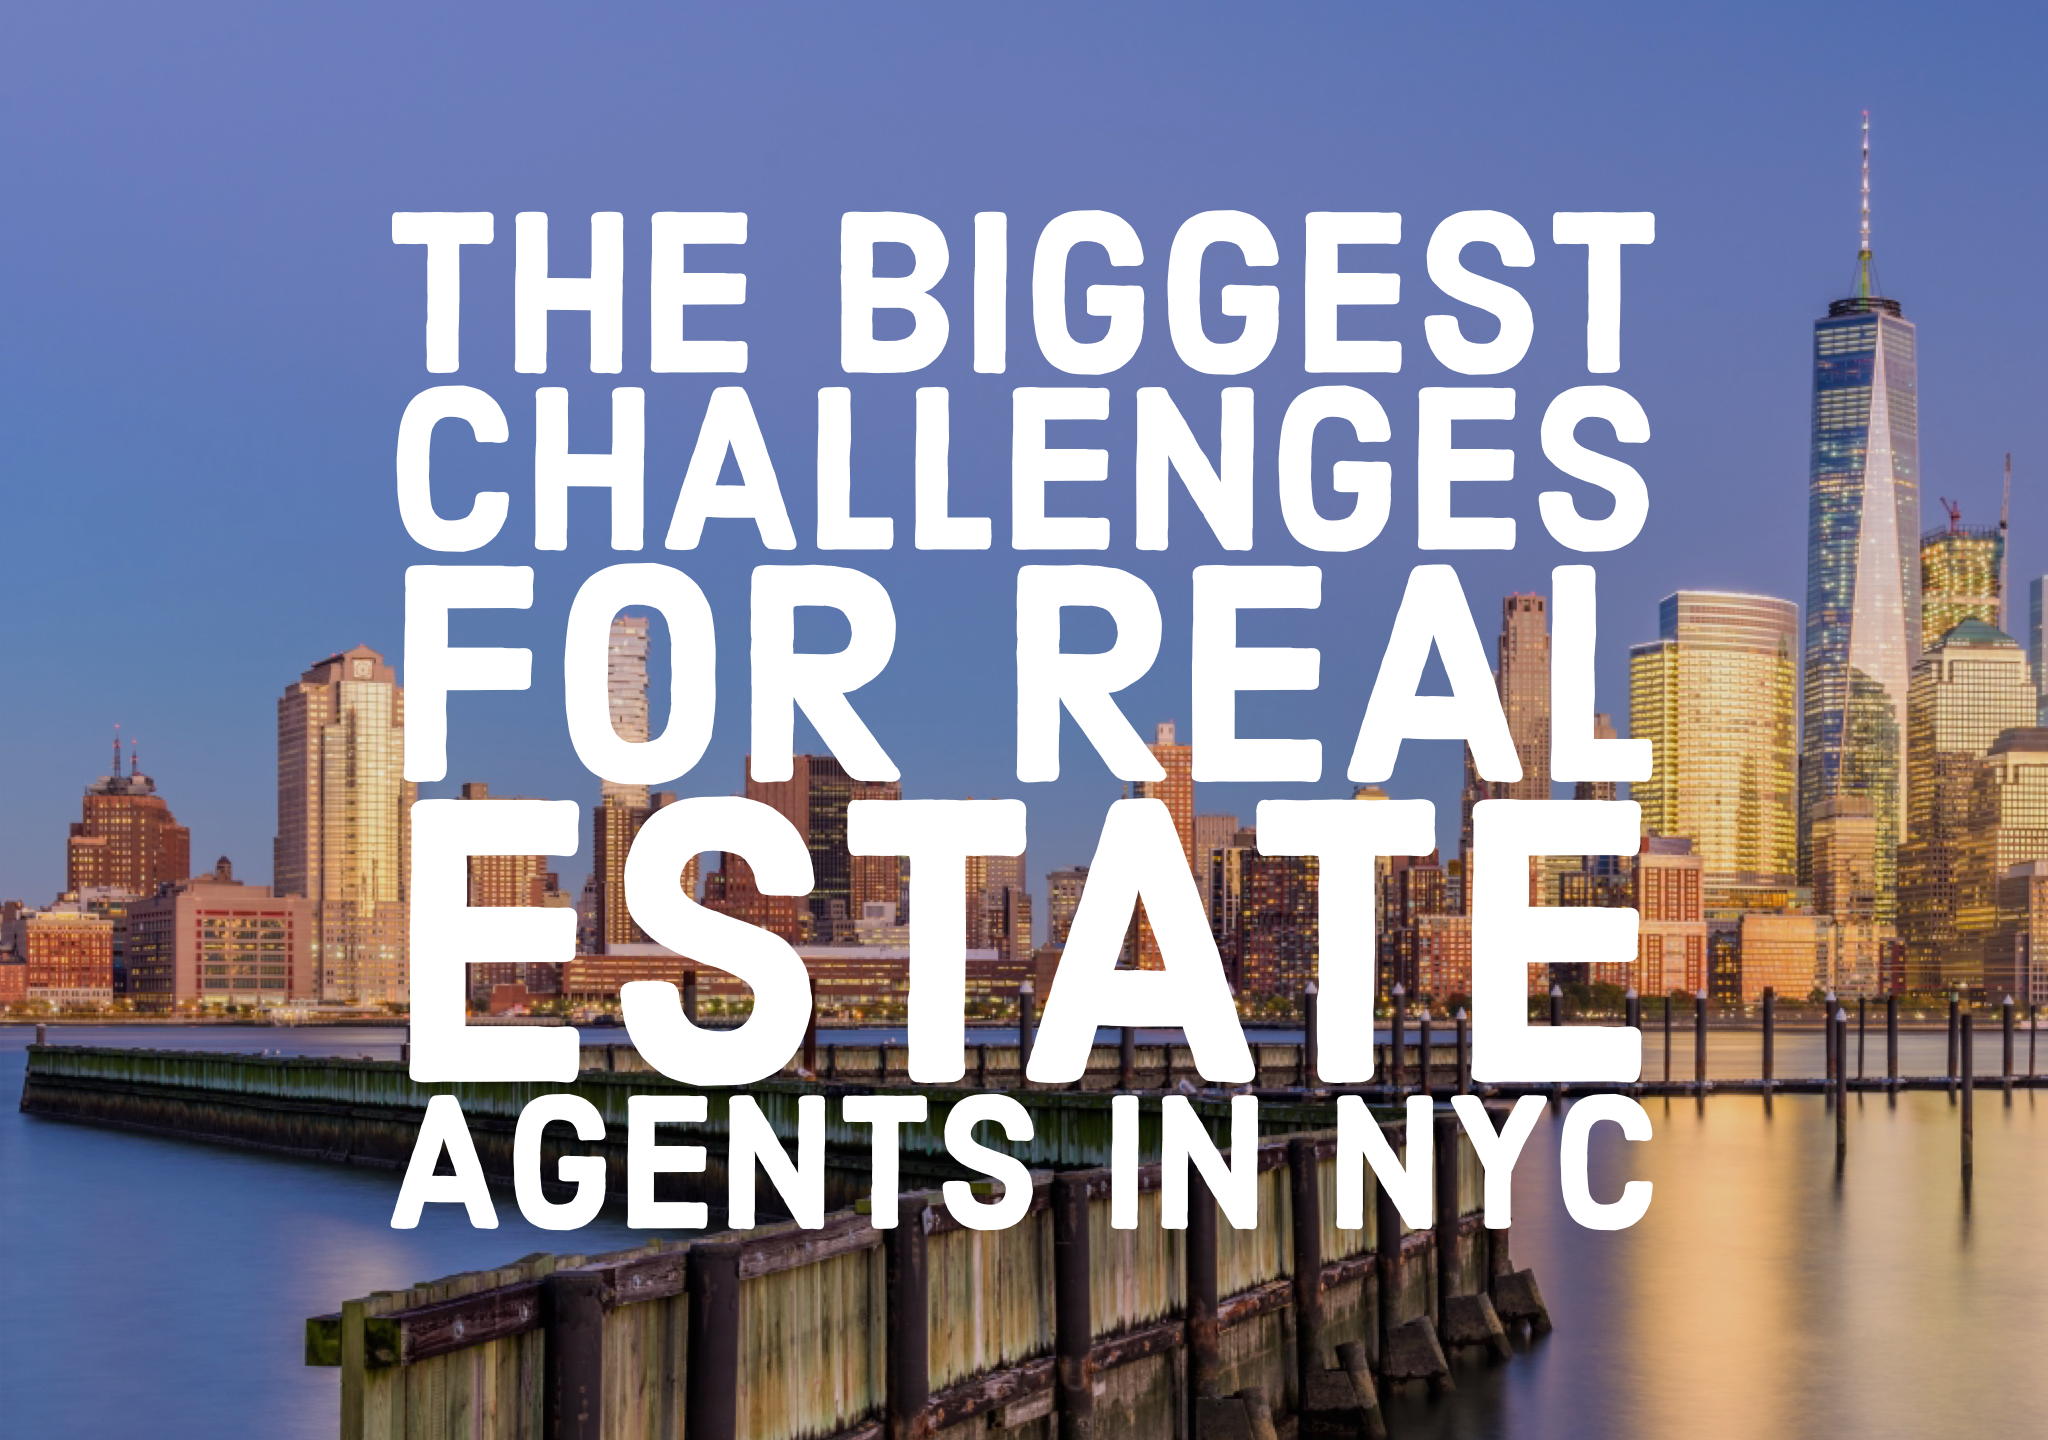 The Biggest Challenges for Real Estate Agents in NYC